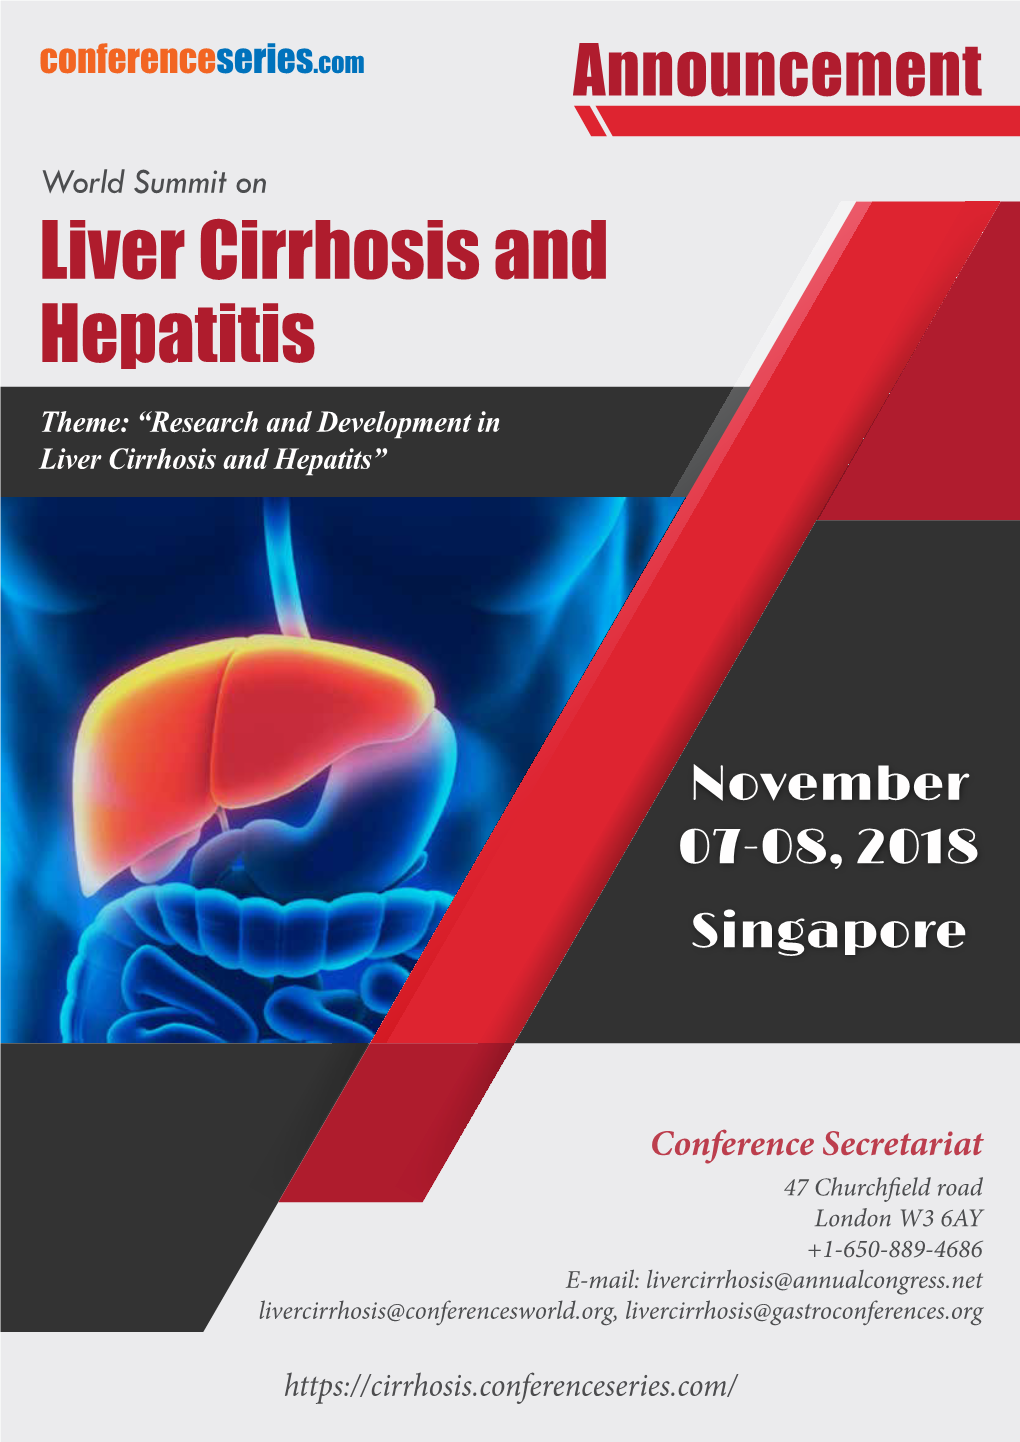 Liver Cirrhosis and Hepatitis Theme: “Research and Development in Liver Cirrhosis and Hepatits”